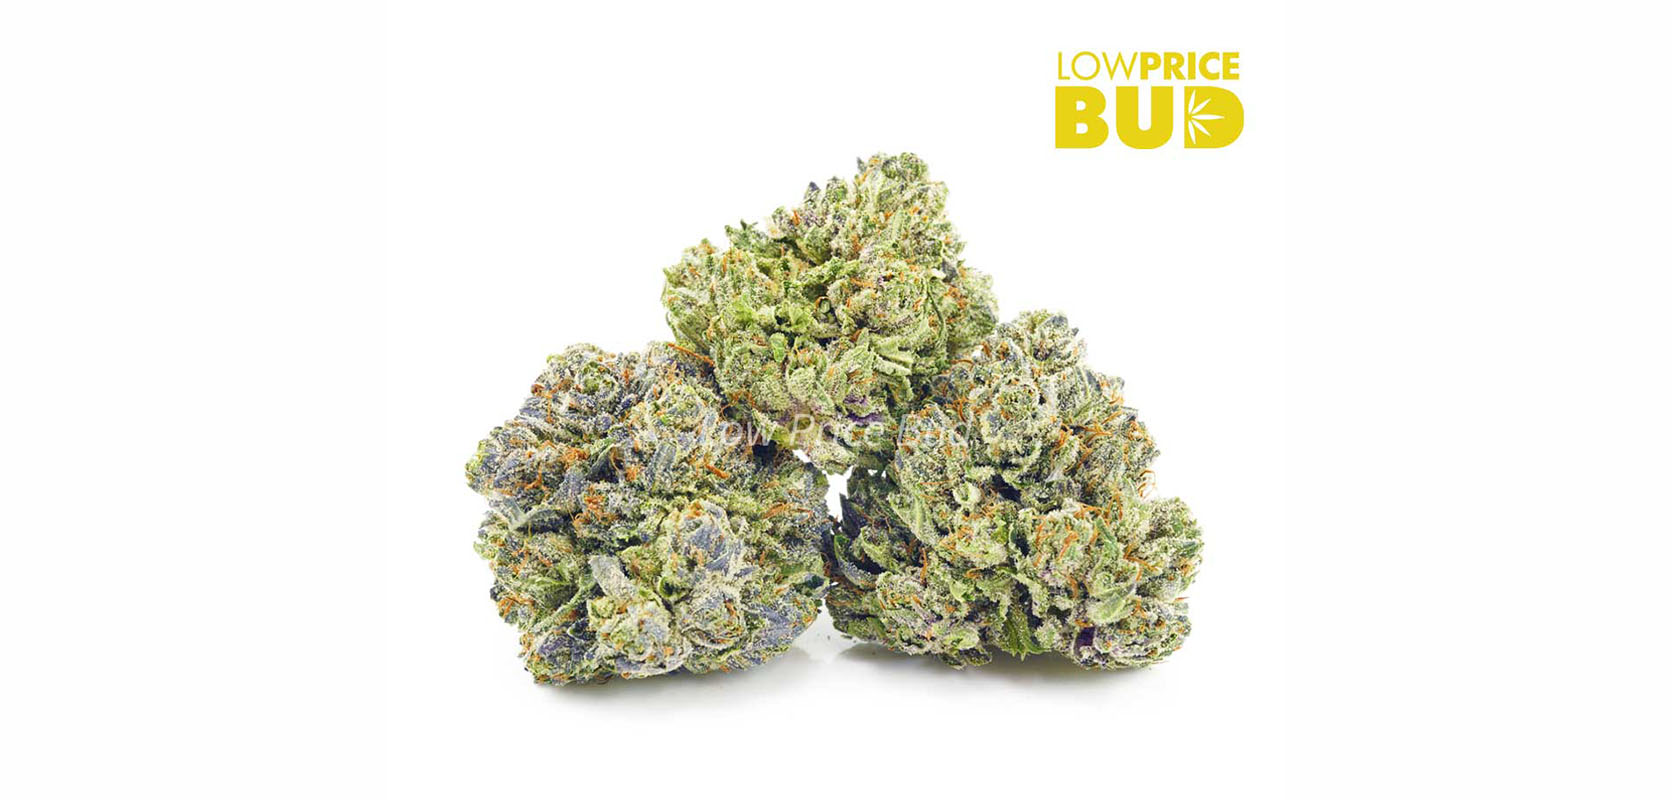 Order weed online High Octane OG AAAA weed from low price bud online dispensary in Canada for mail order marijuana.